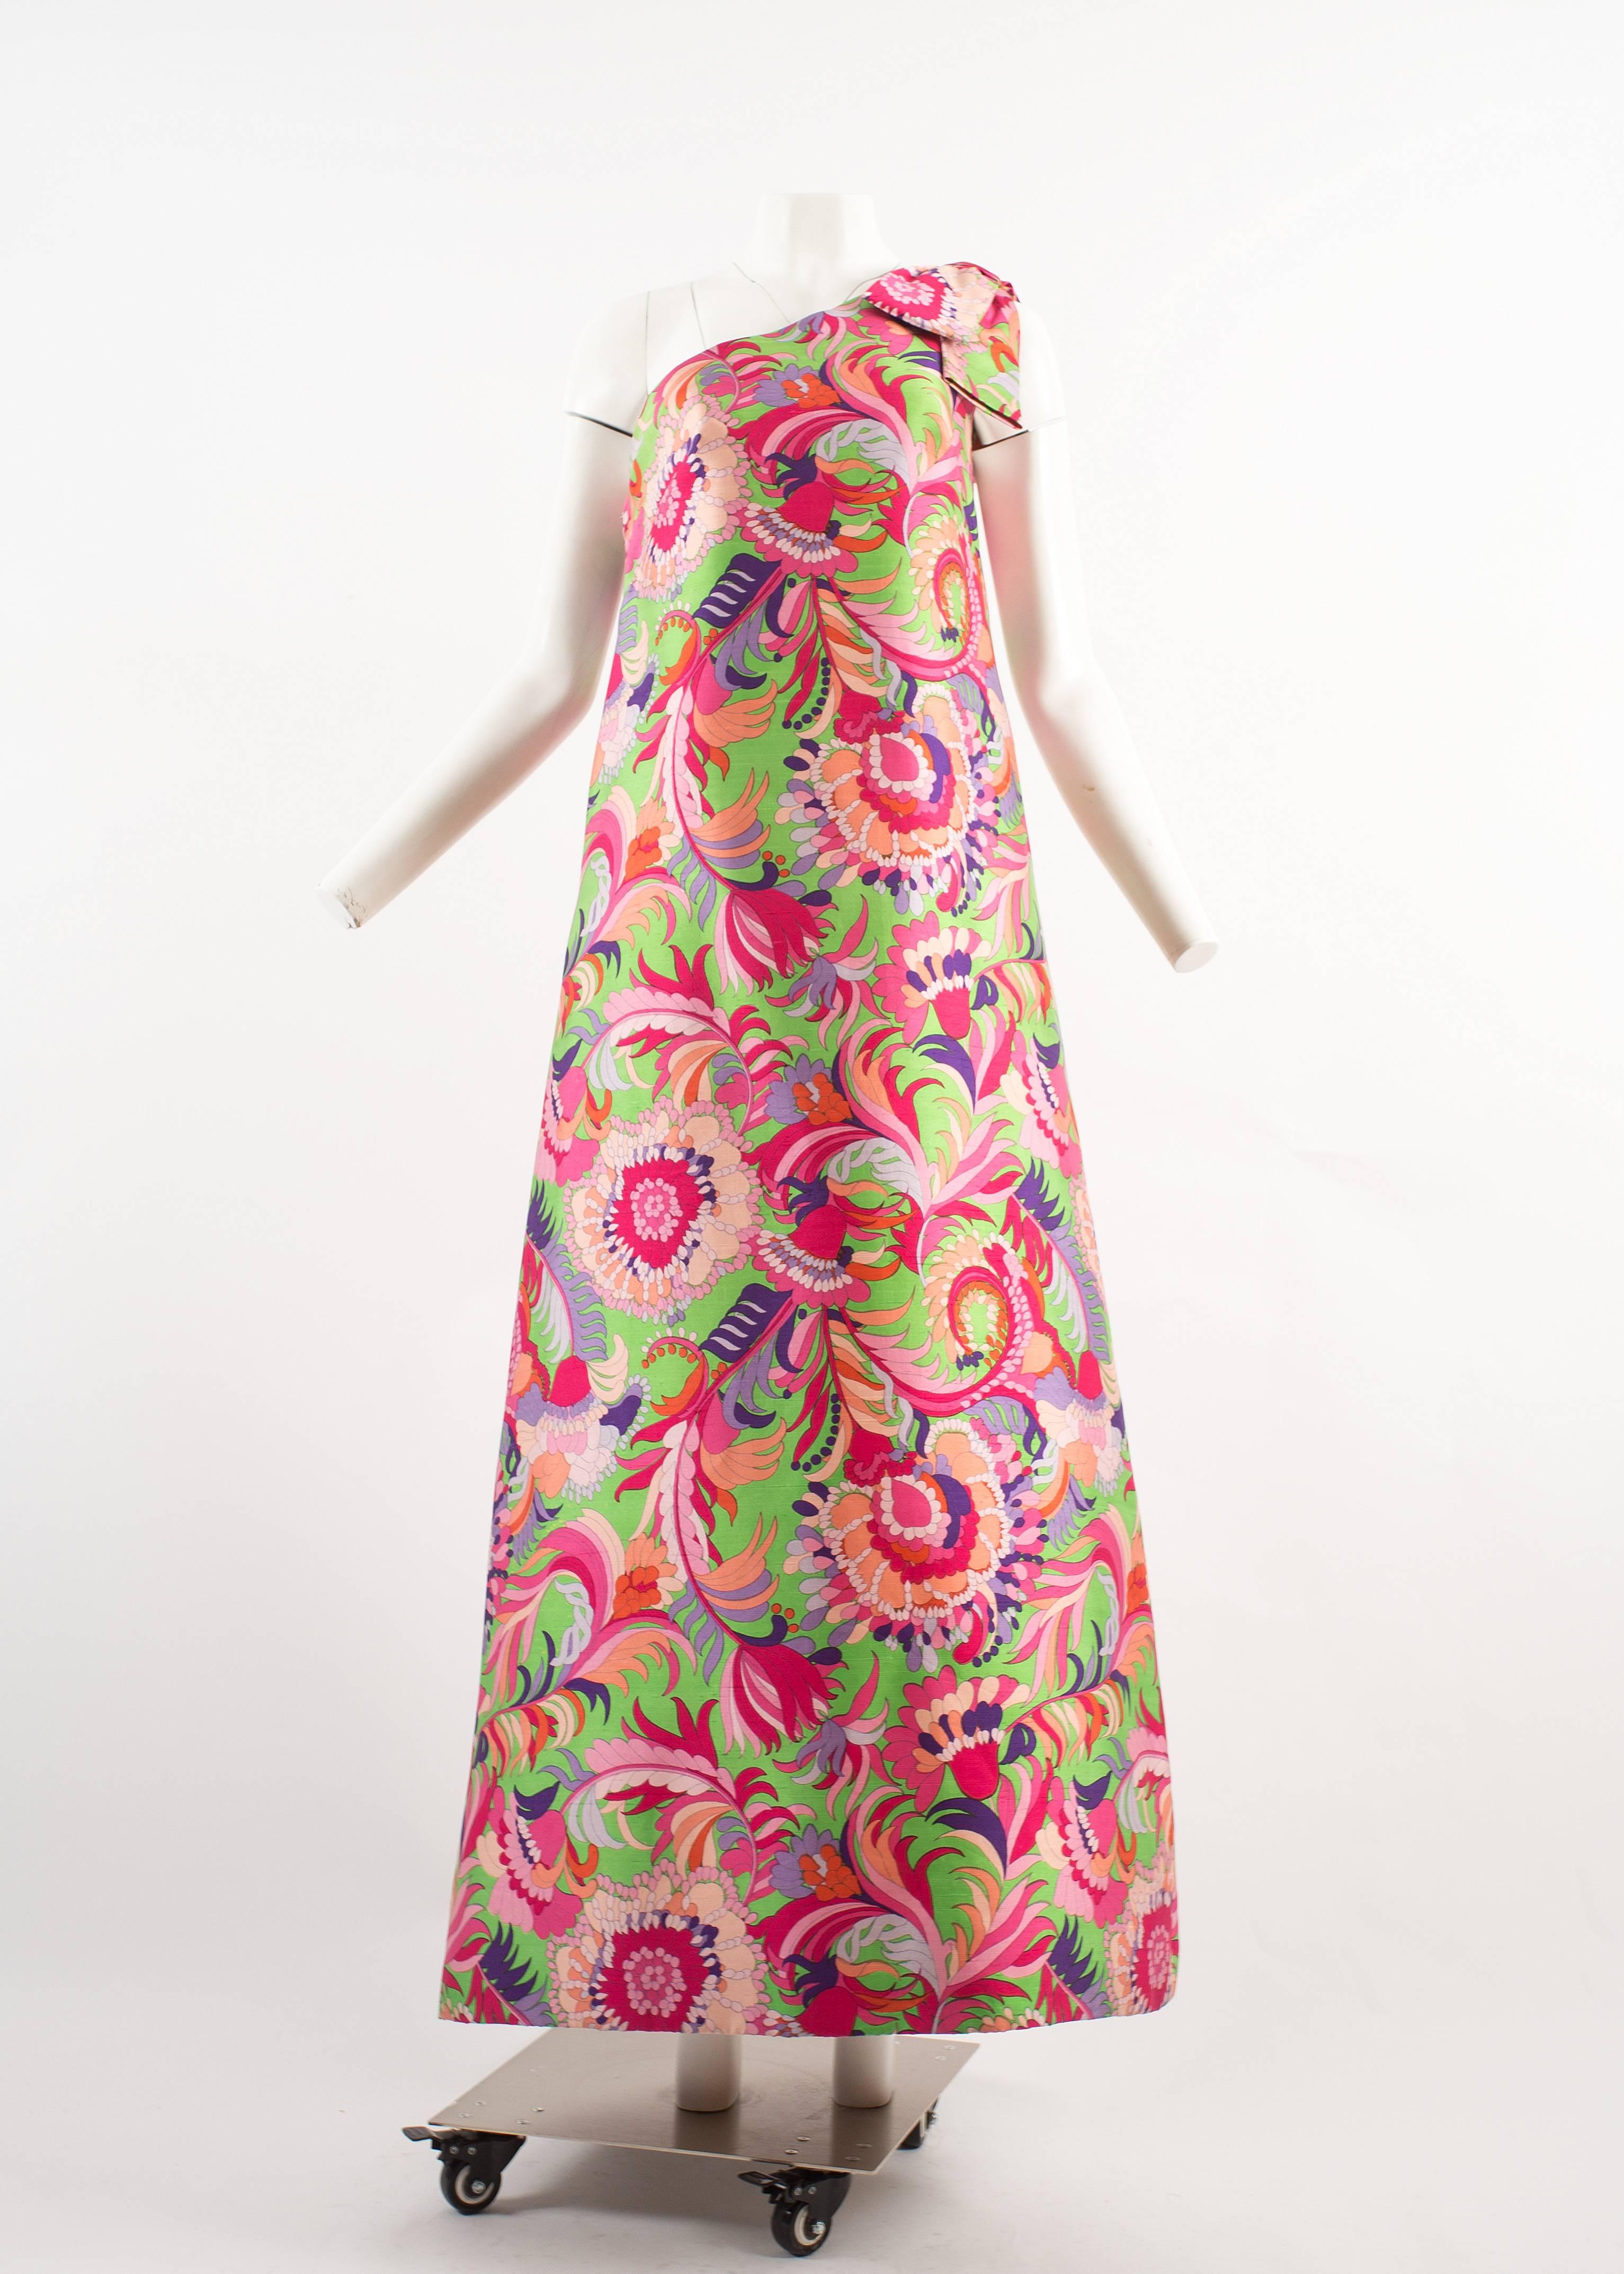 Christian Dior 1960s asymmetric silk evening a-line dress

- vibrant psychedelic printed on raw silk
- large bow hangs on shoulders
- internal corset with boning
- matching shoes designed by Charles Jourdan
- made to a couture standard